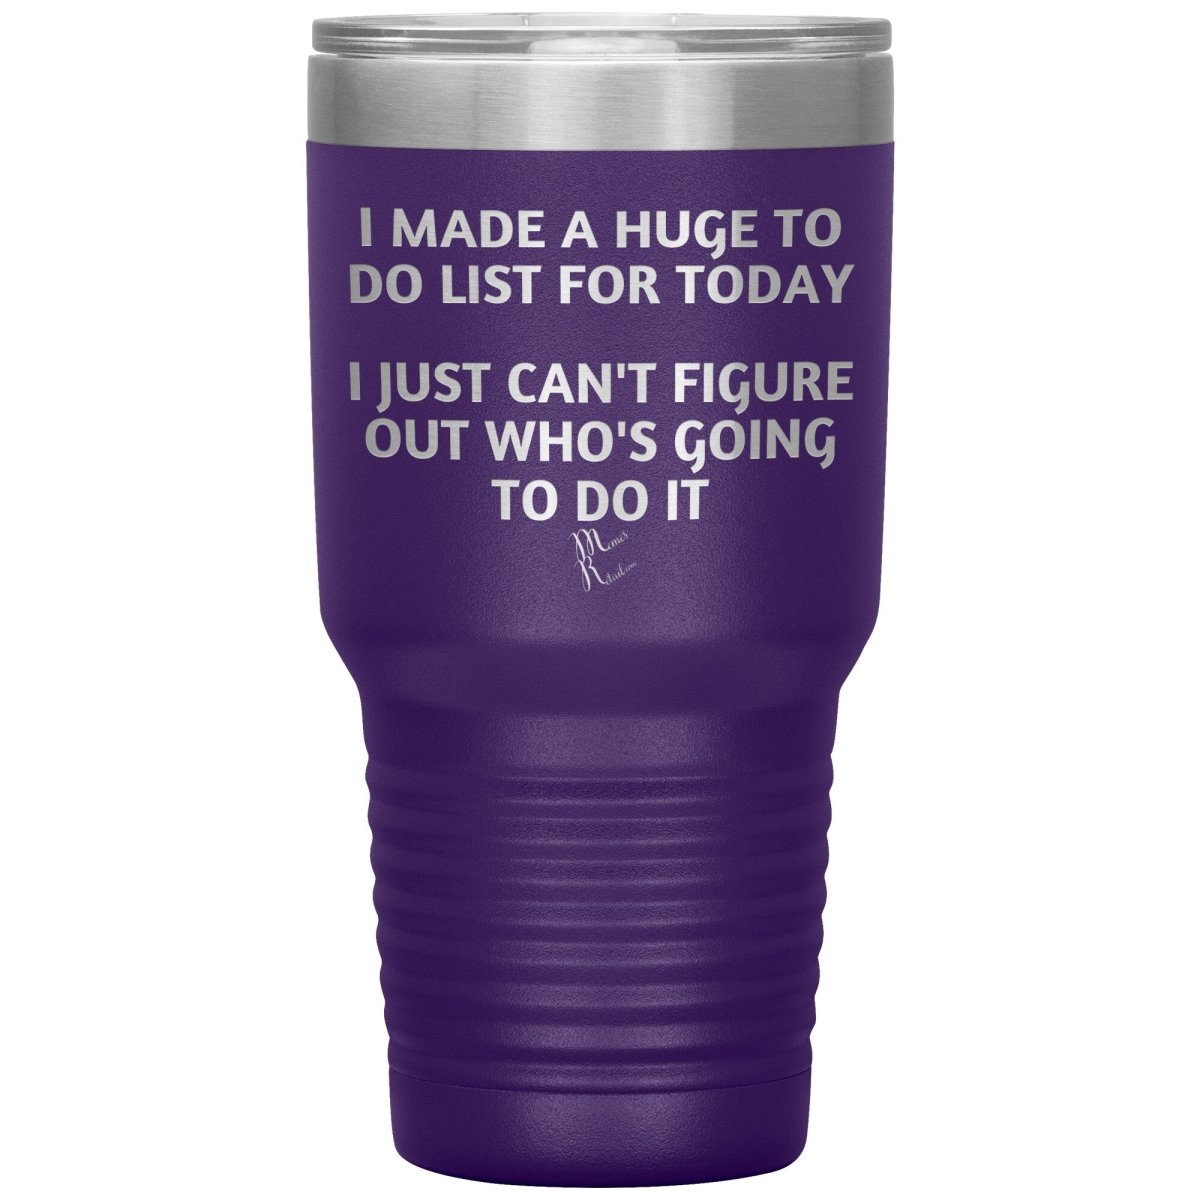 I made a huge to do list for today. I just can't figure out who's going to do it Tumblers, 30oz Insulated Tumbler / Purple - MemesRetail.com